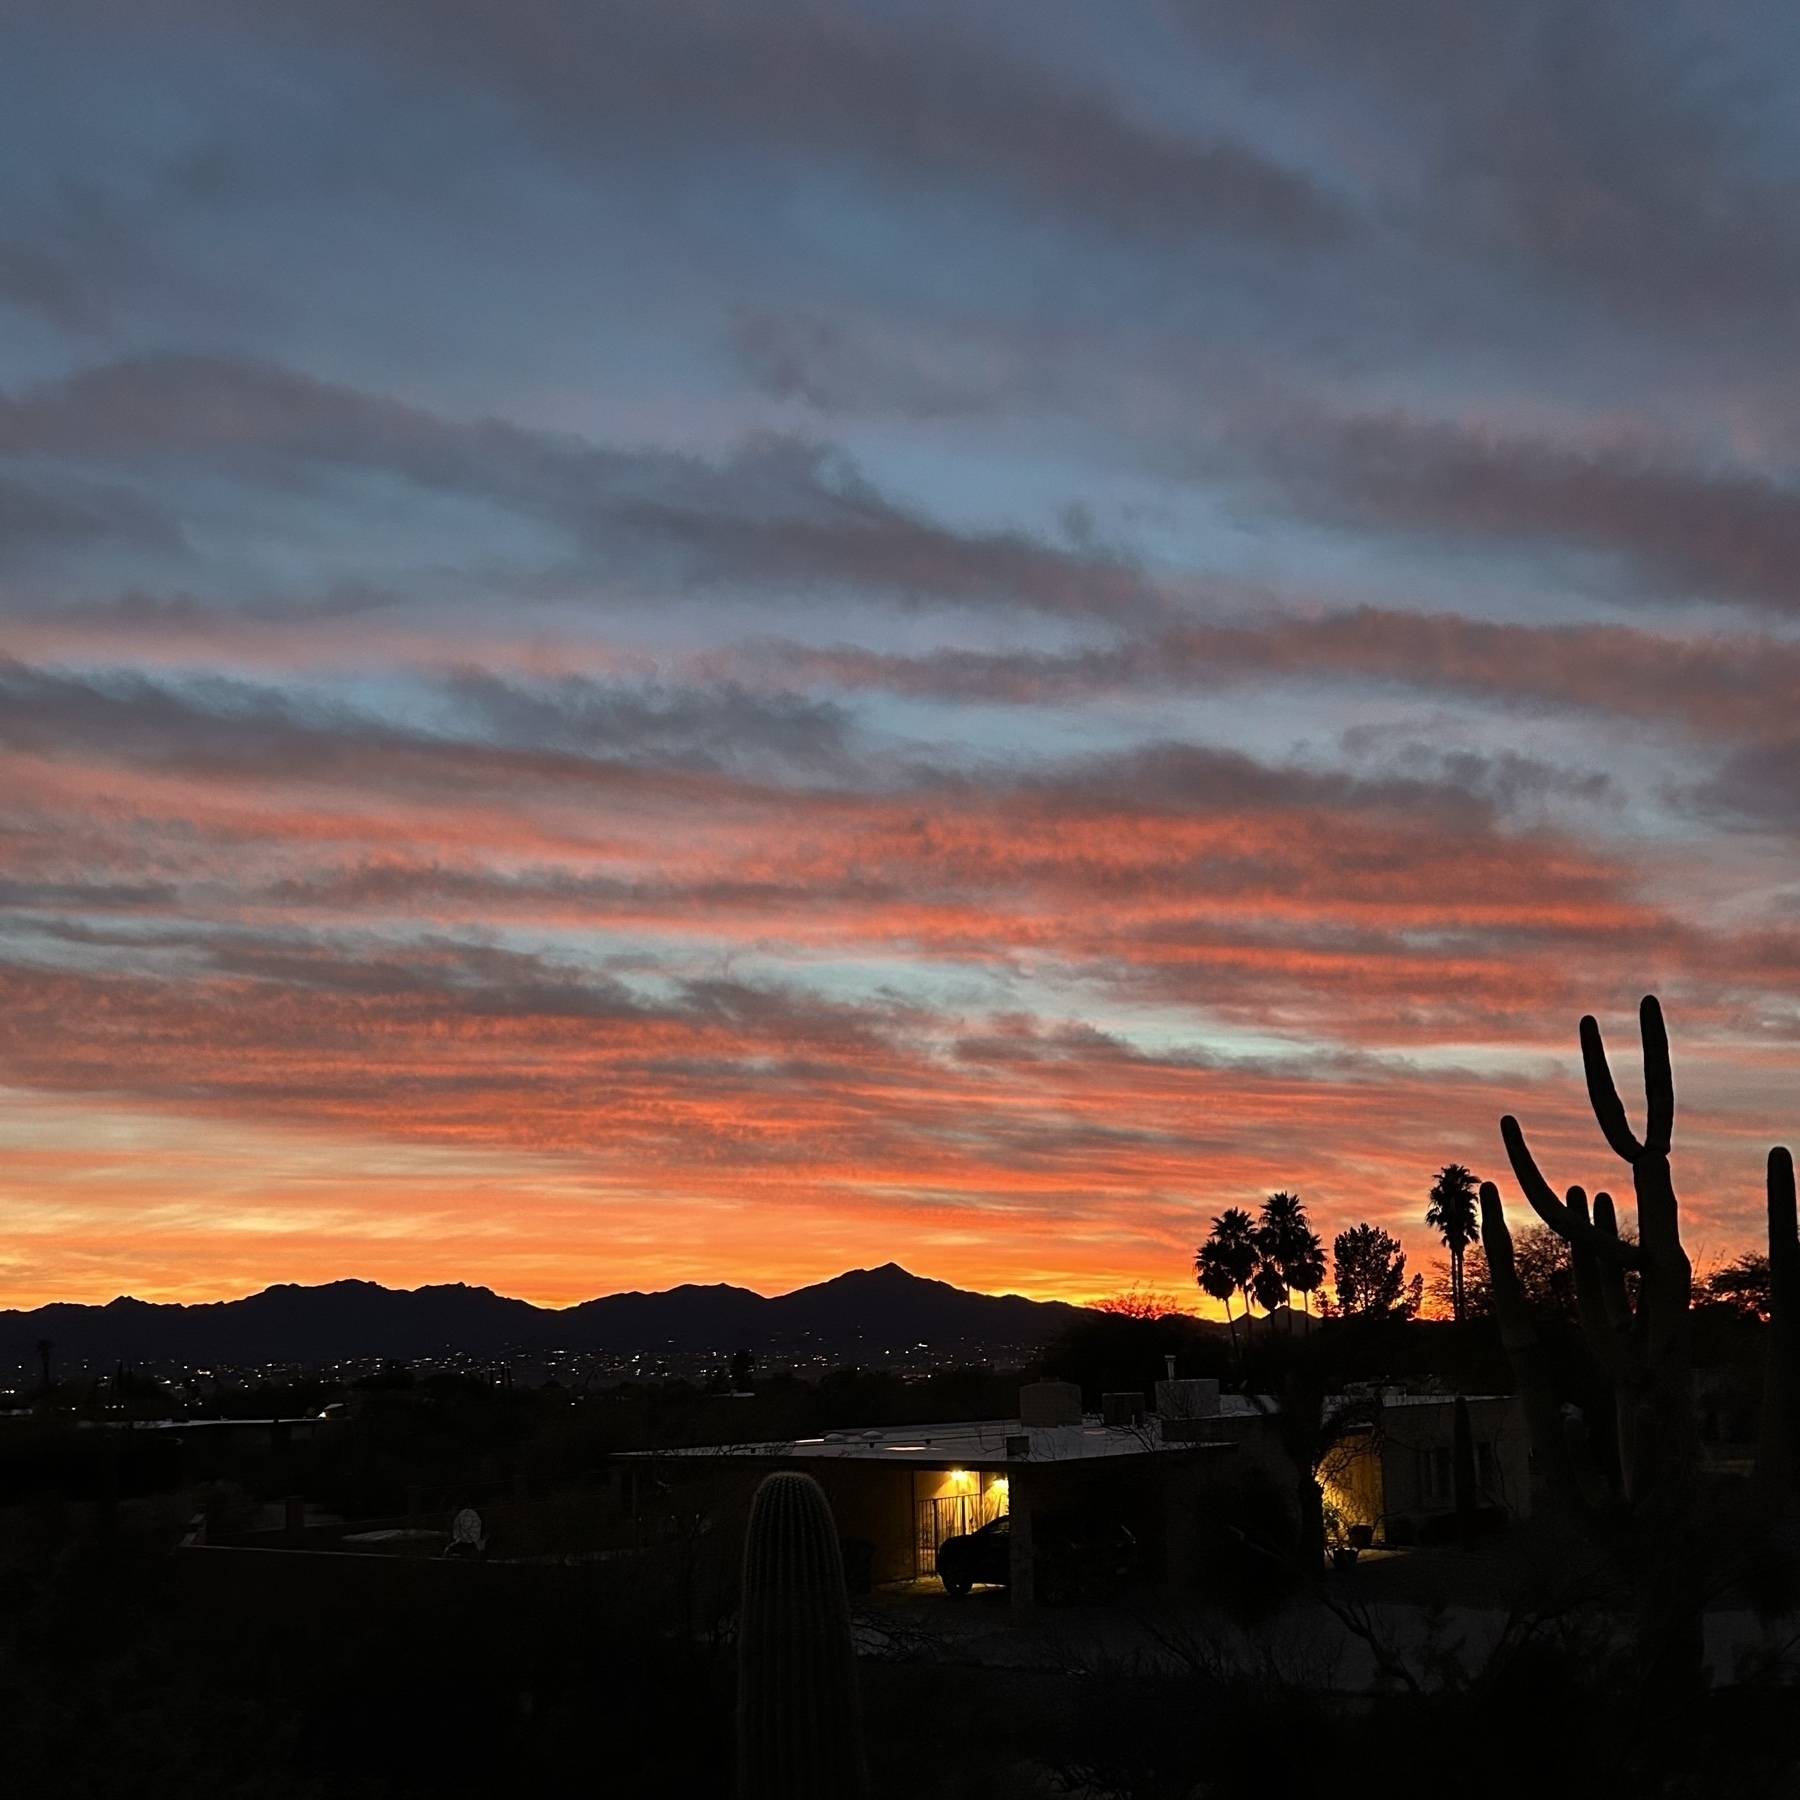 Sunset in Tucson on New Years Eve 2022.